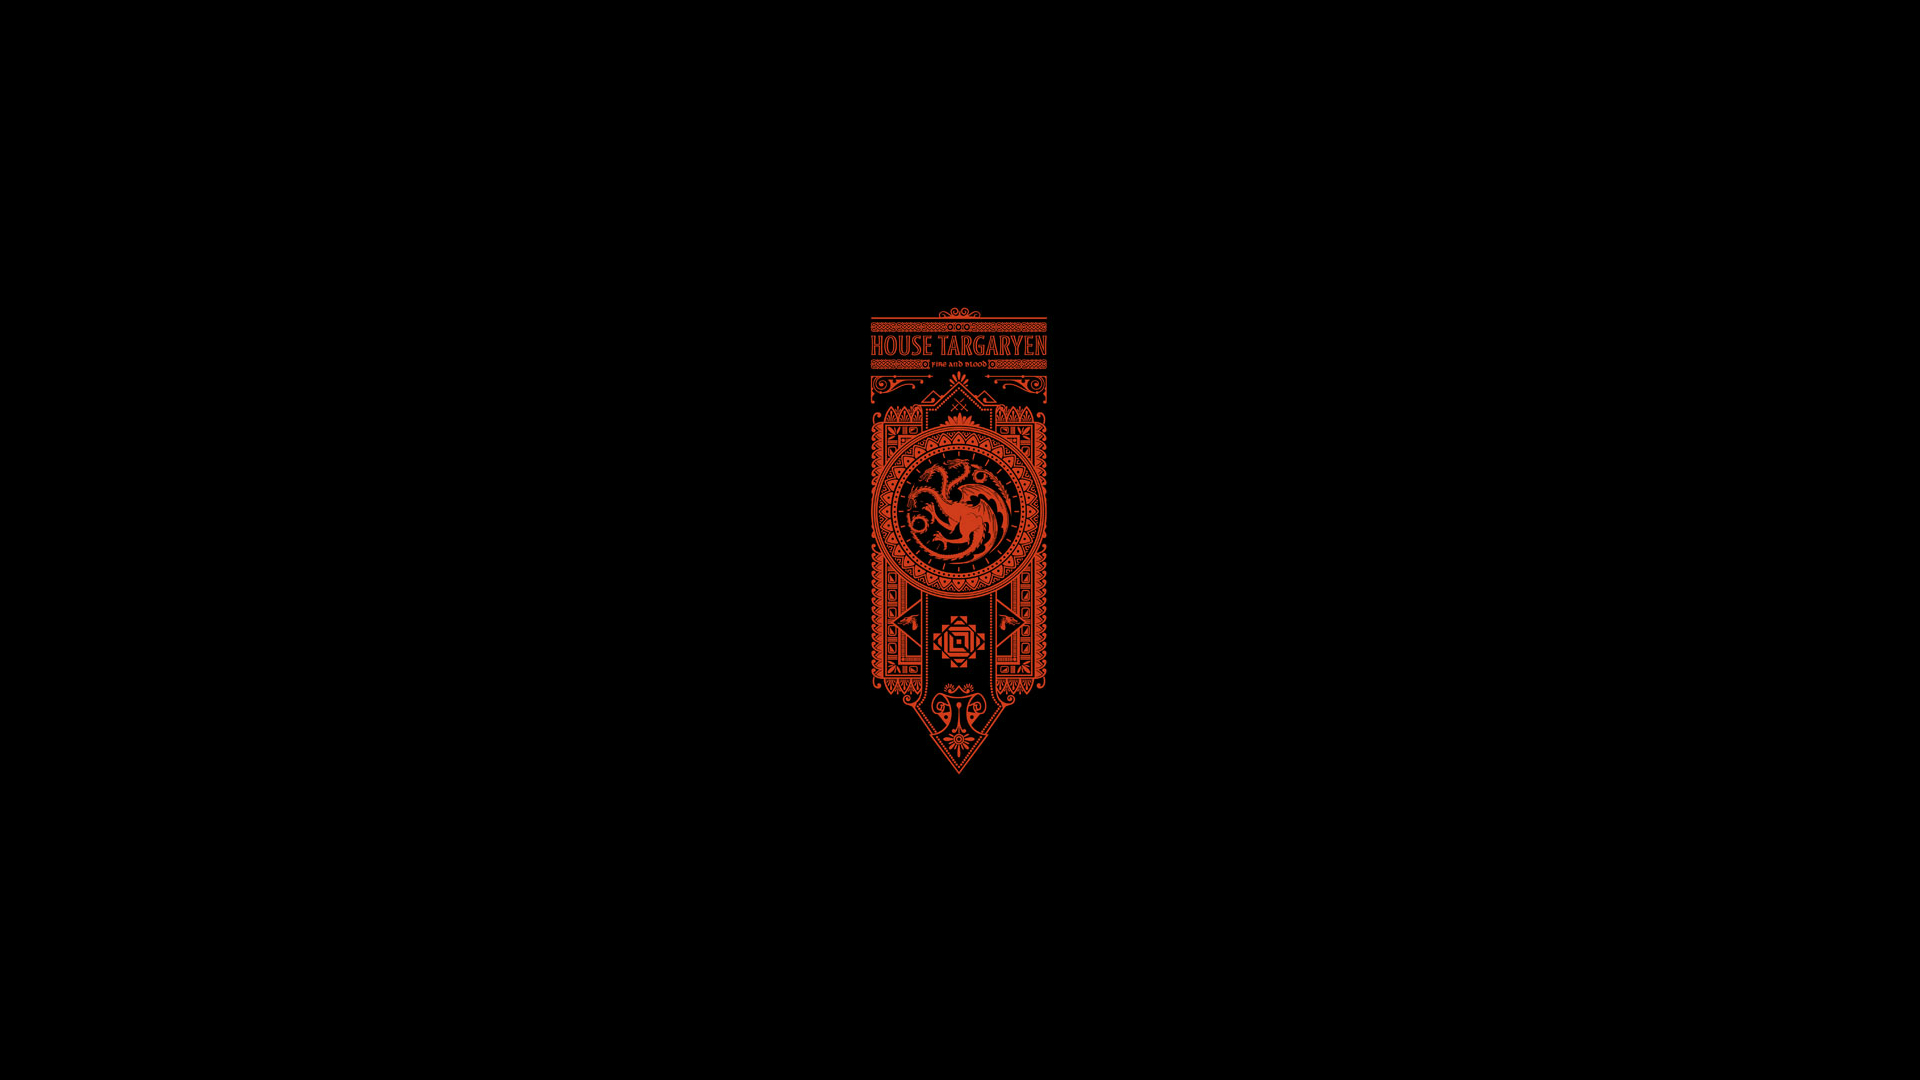 1920x1080 Game of Thrones Song of Ice and Fire Targaryen Minimal Black wallpaper | | 100591